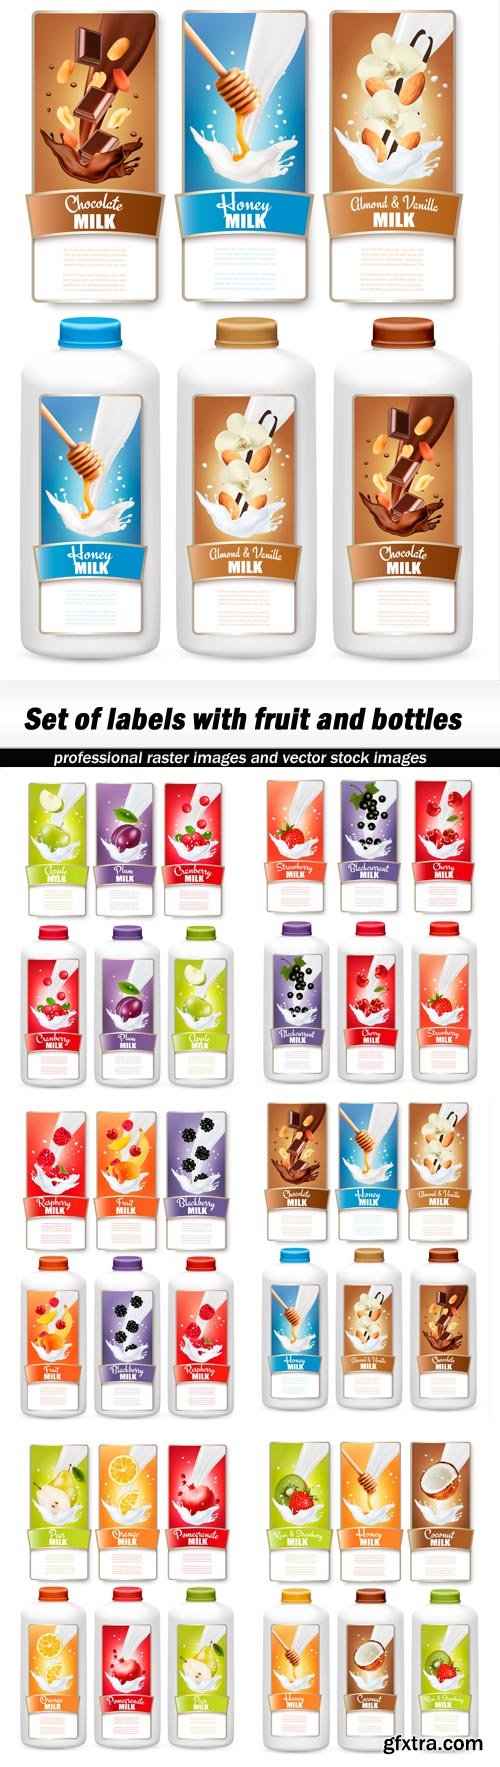 Set of labels with fruit and bottles - 6 EPS